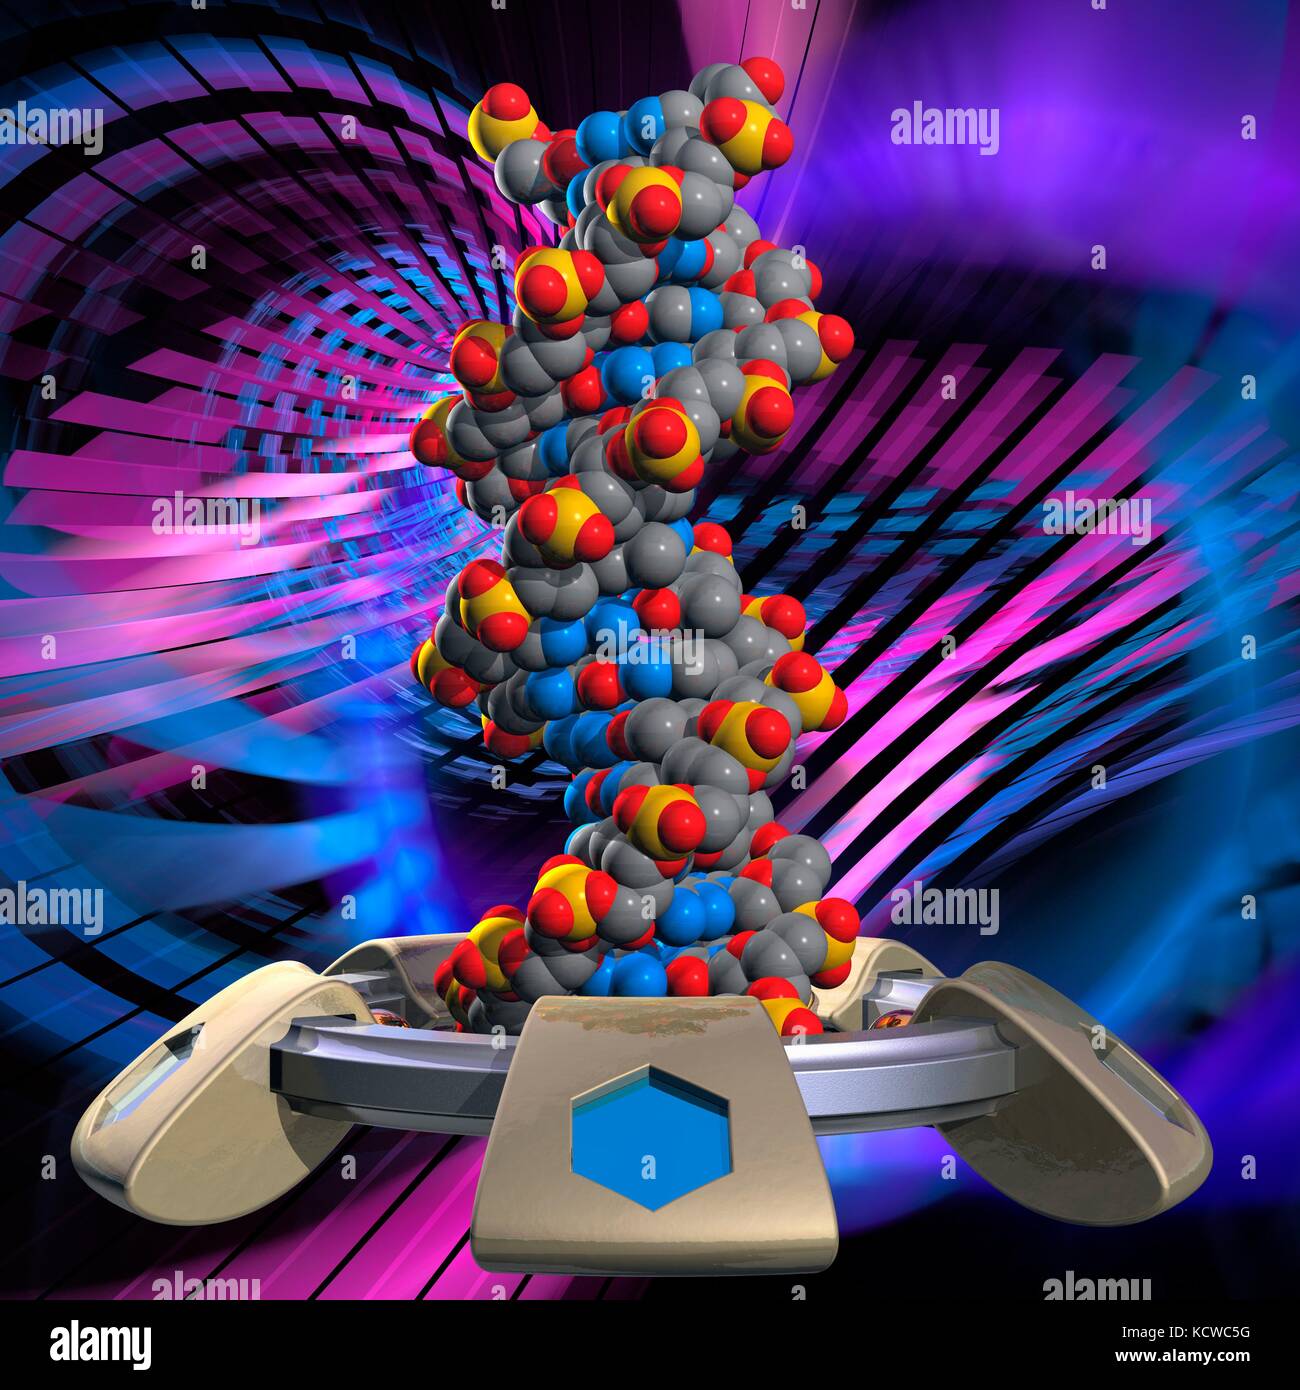 Conceptual illustration of a double stranded DNA (deoxyribonucleic acid) molecule with DNA generating or editing equipment. DNA is composed of two strands twisted into a double helix. Each strand consists of a sugar-phosphate backbone attached to nucleotide bases. There are four bases: adenine, cytosine, guanine and thymine. The bases are joined together by hydrogen bonds. DNA contains sections called genes that encode the body's genetic information. Atoms are represented as spheres and are colour-coded: carbon (grey), nitrogen (blue), oxygen (red) and phosphorus (orange). Stock Photo